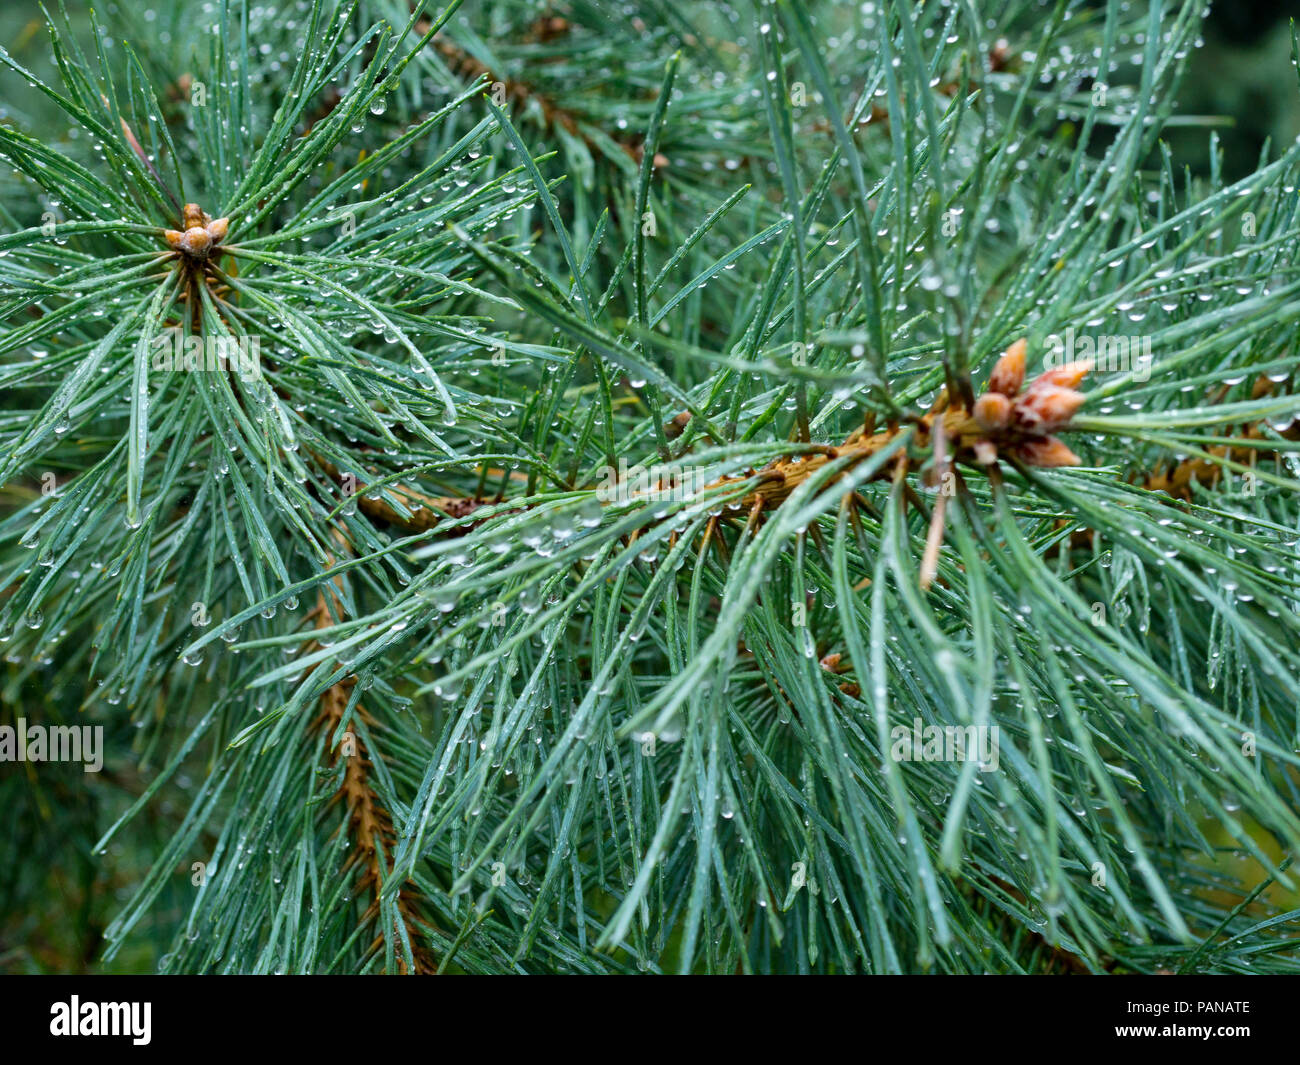 Sprig with the fruit of Common Kruger (Frangula alnus Mill.) On a summer rainy day Stock Photo